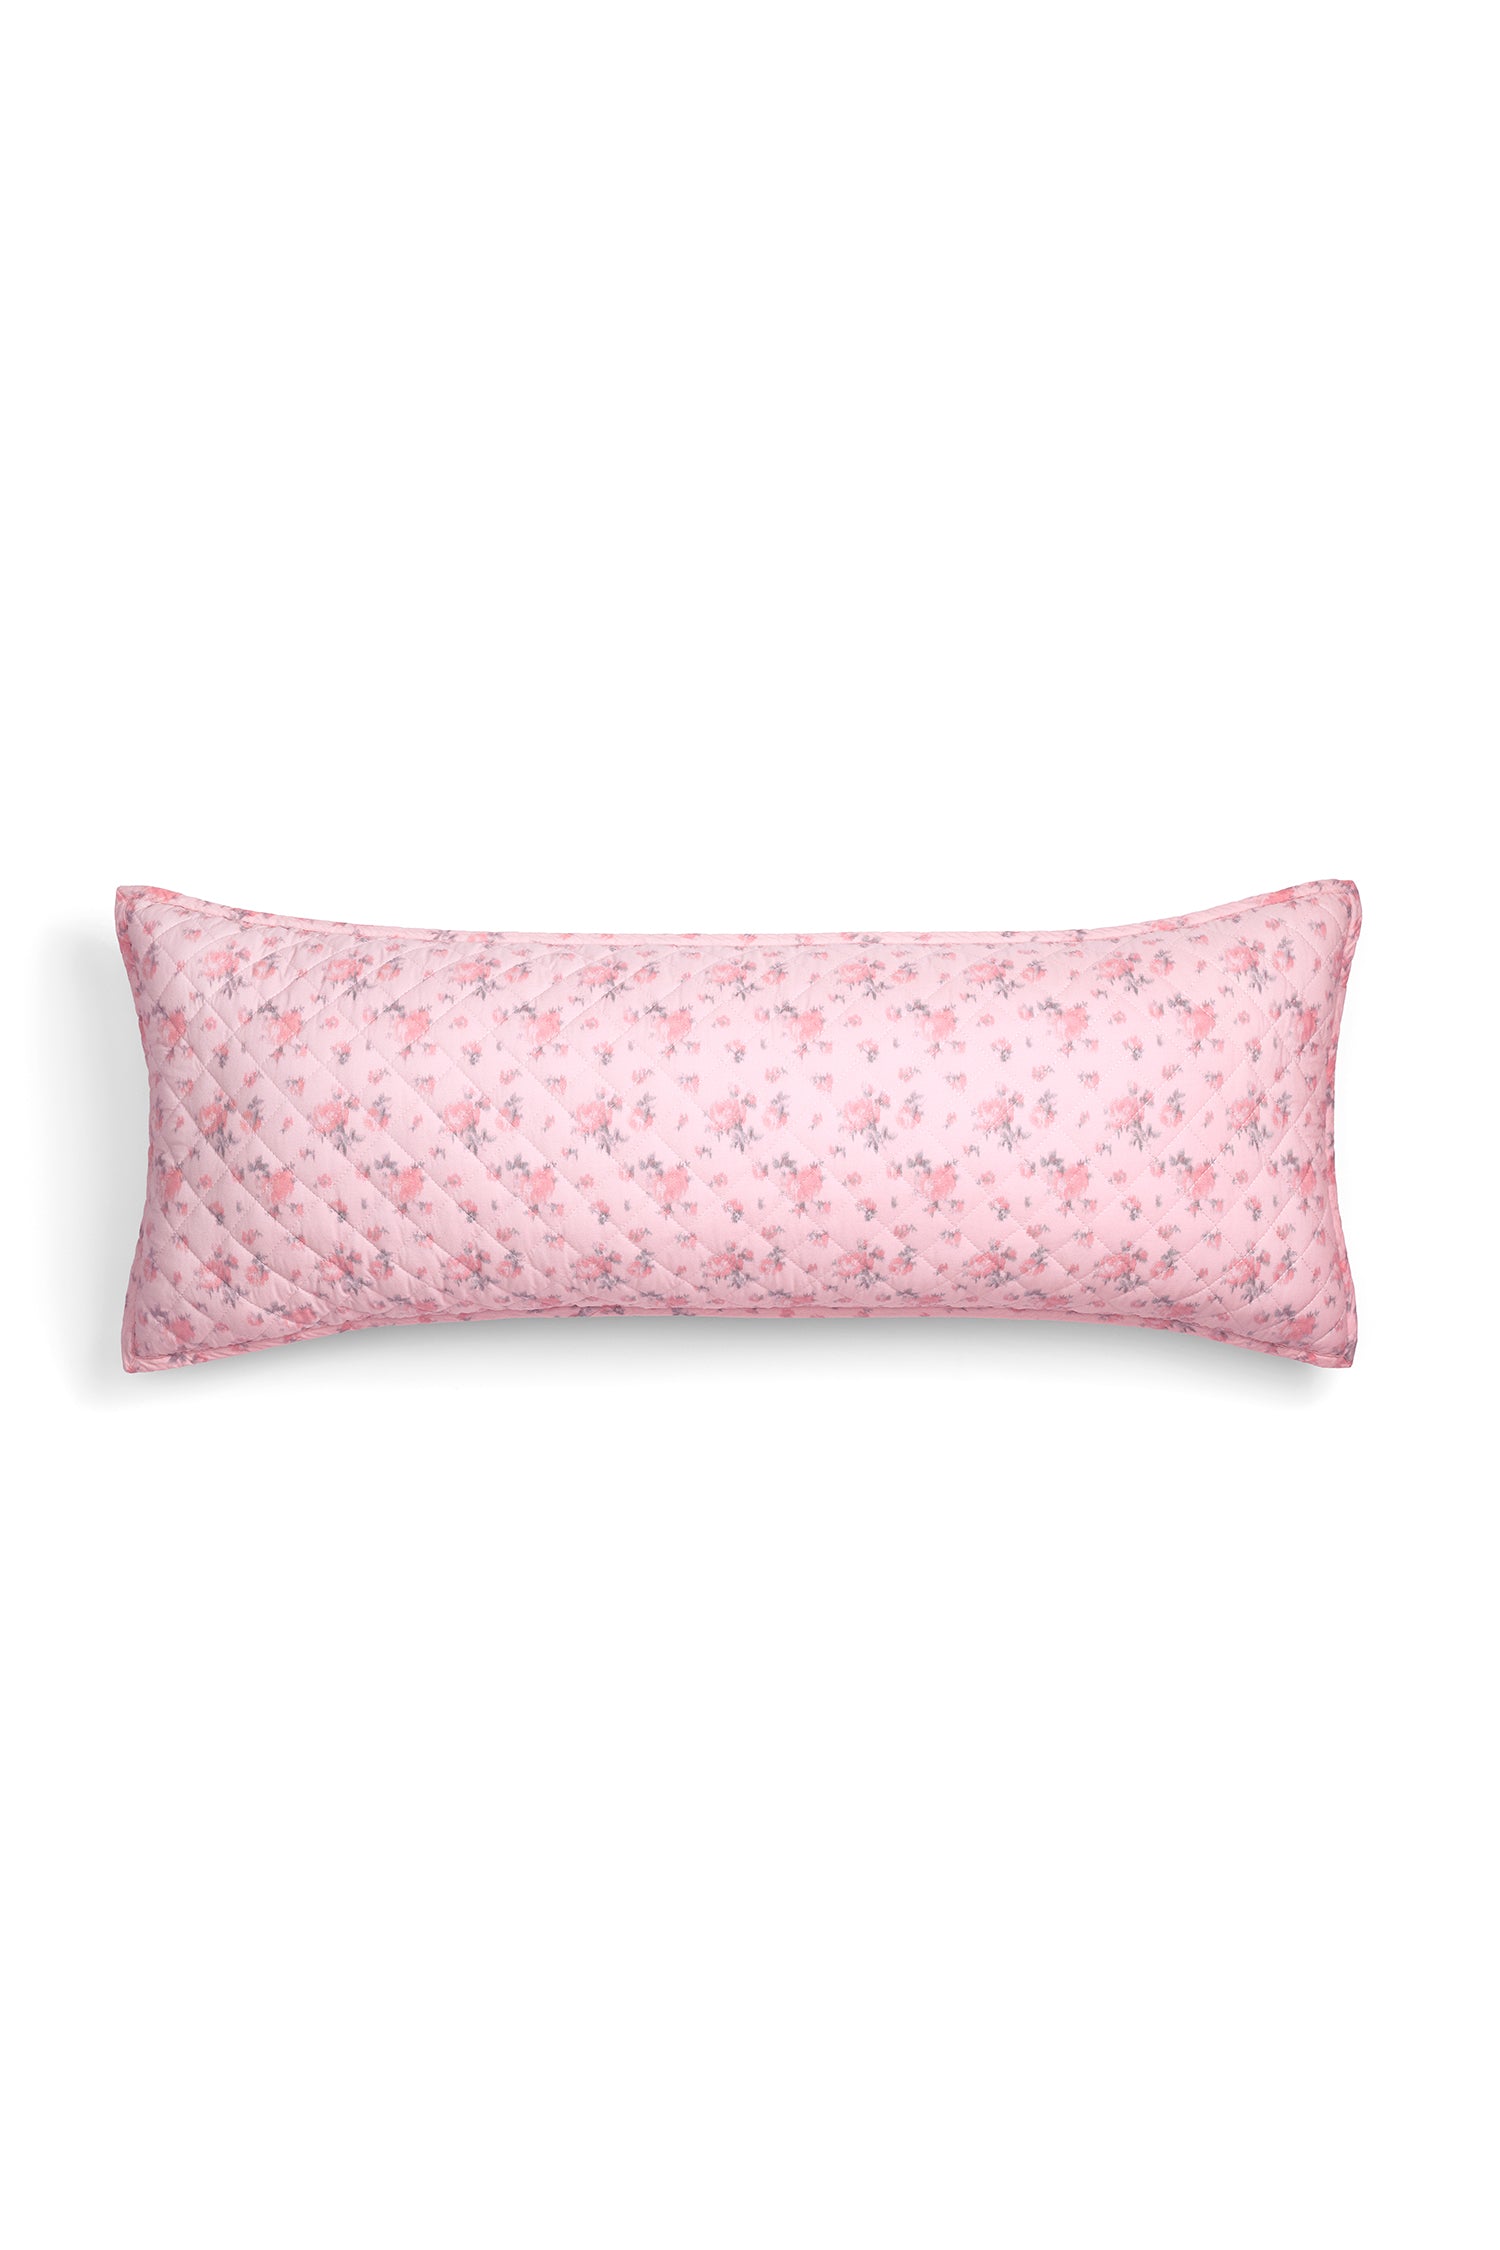 A beautiful lumbar pillow with a delicate pink floral print and diamond stitching.